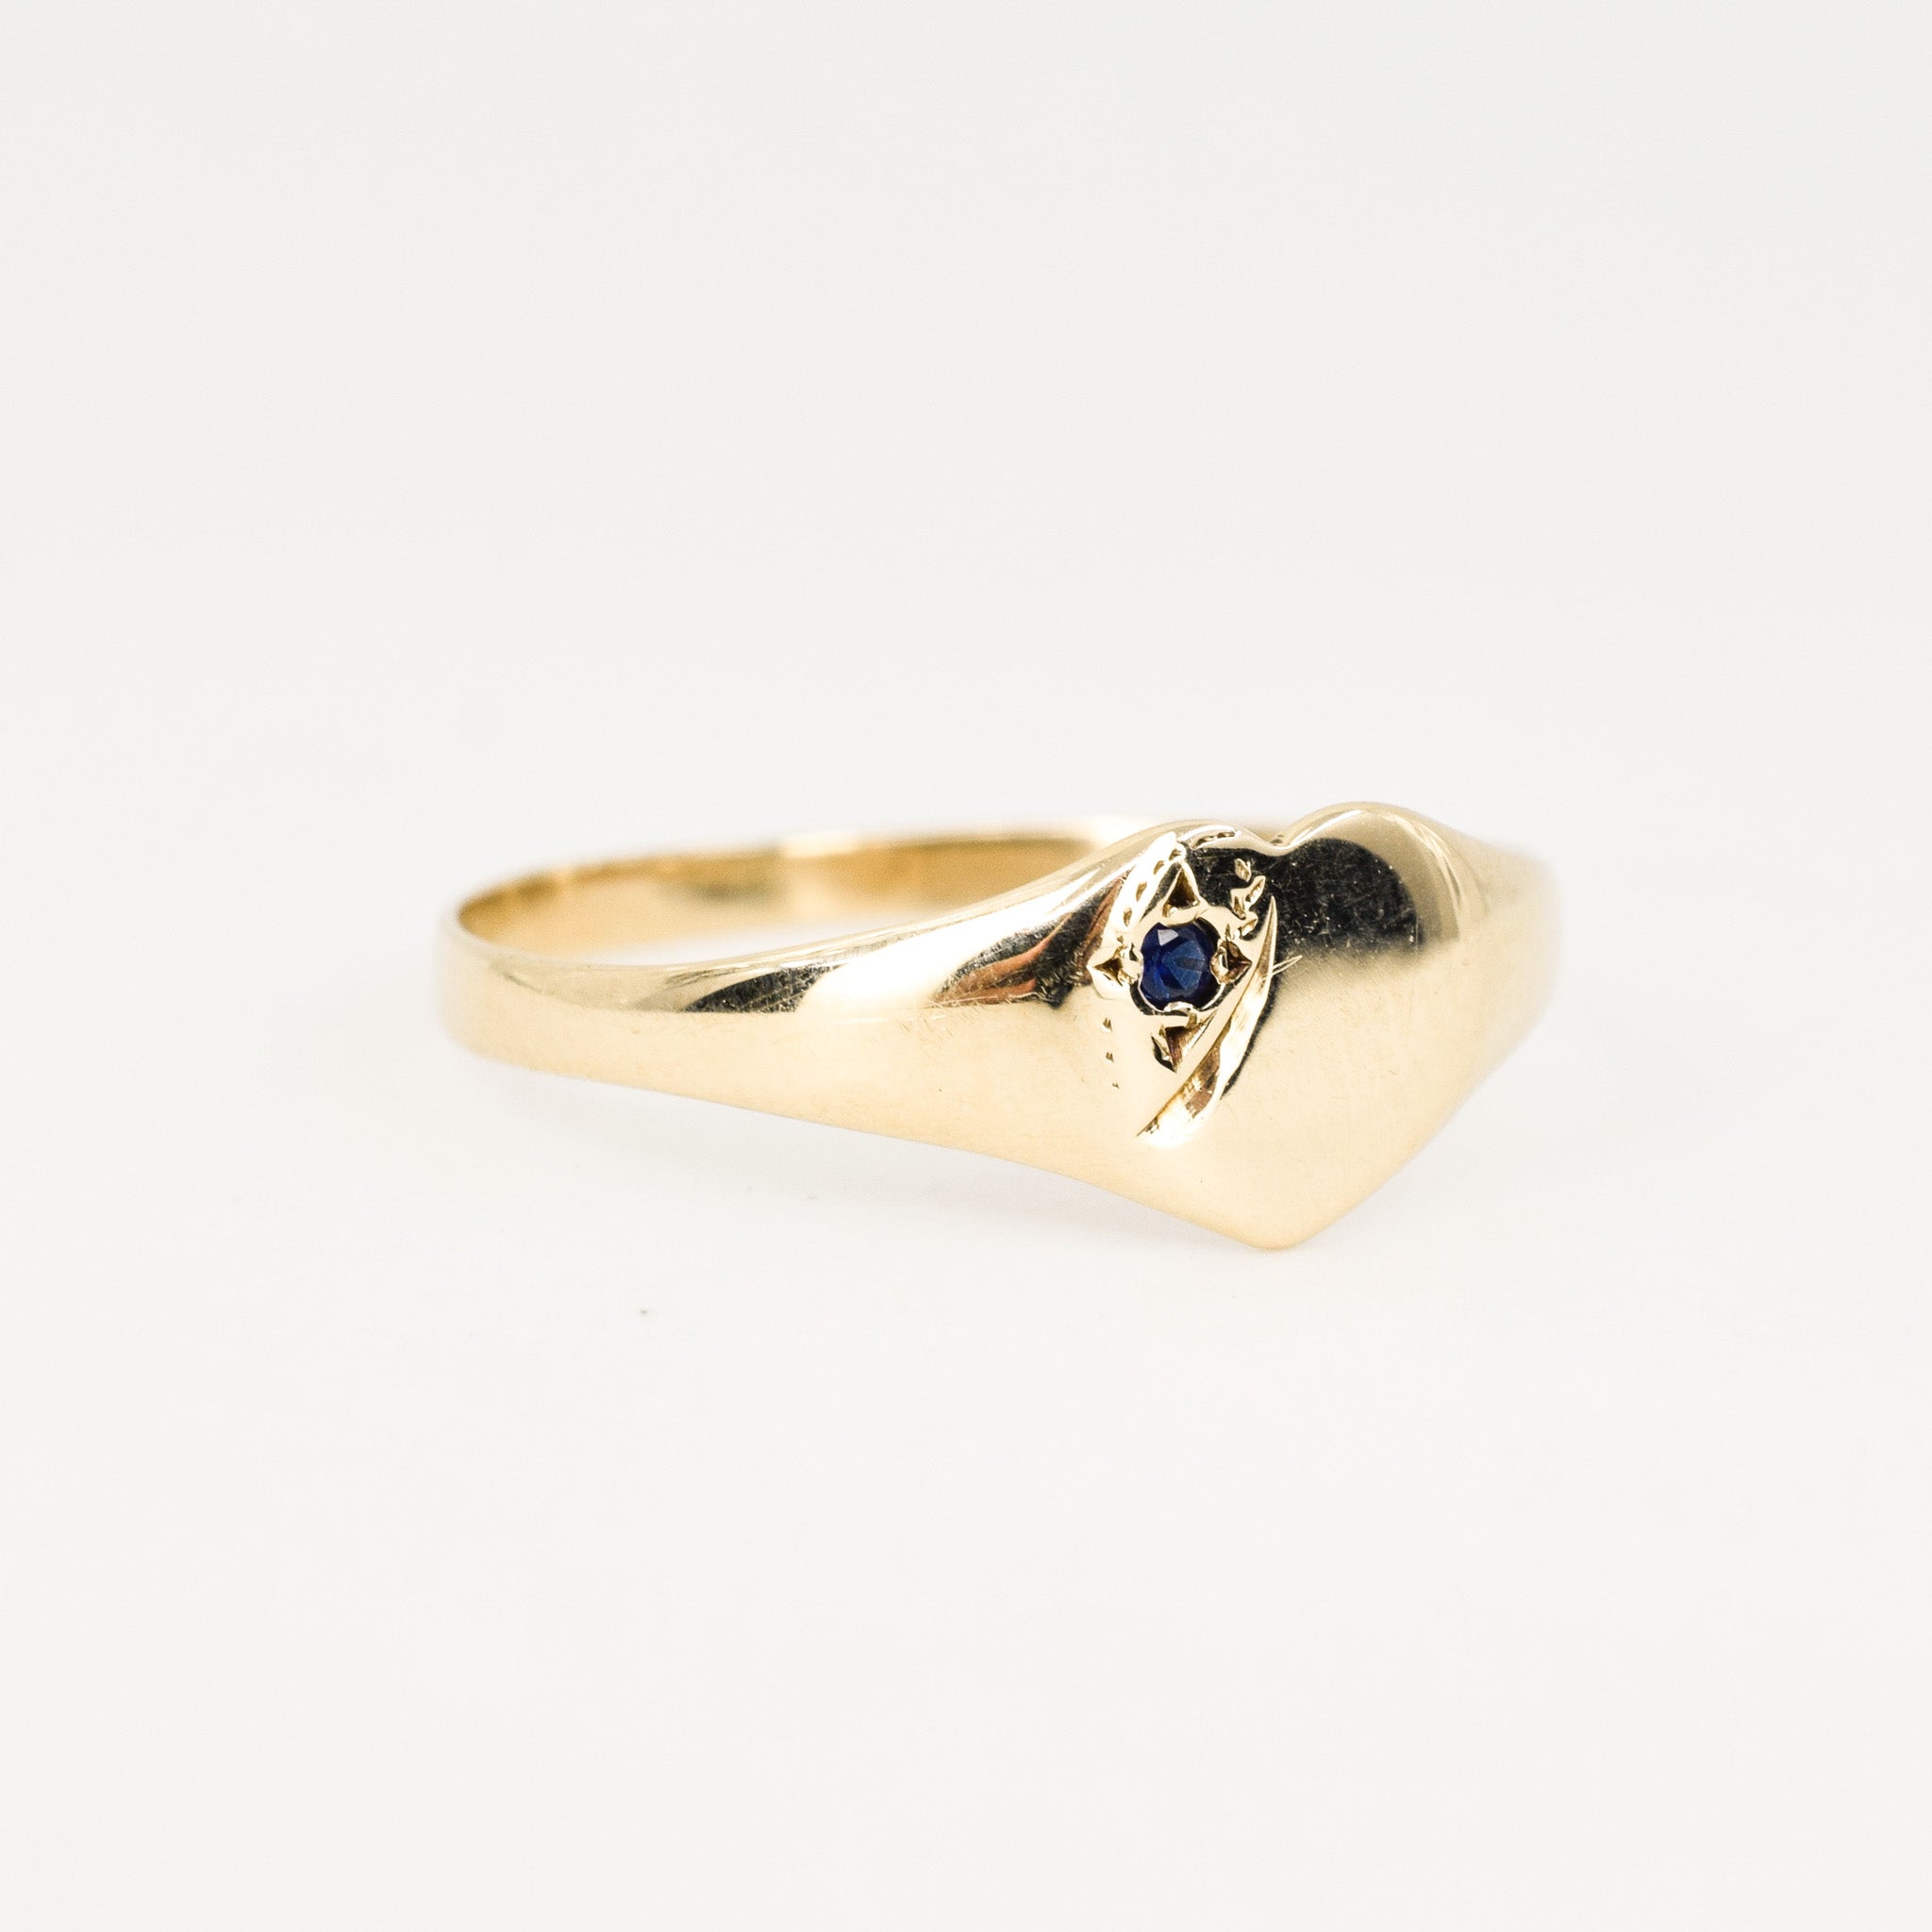 vintage gold sapphire signet ring, folklor vintage jewelry canada